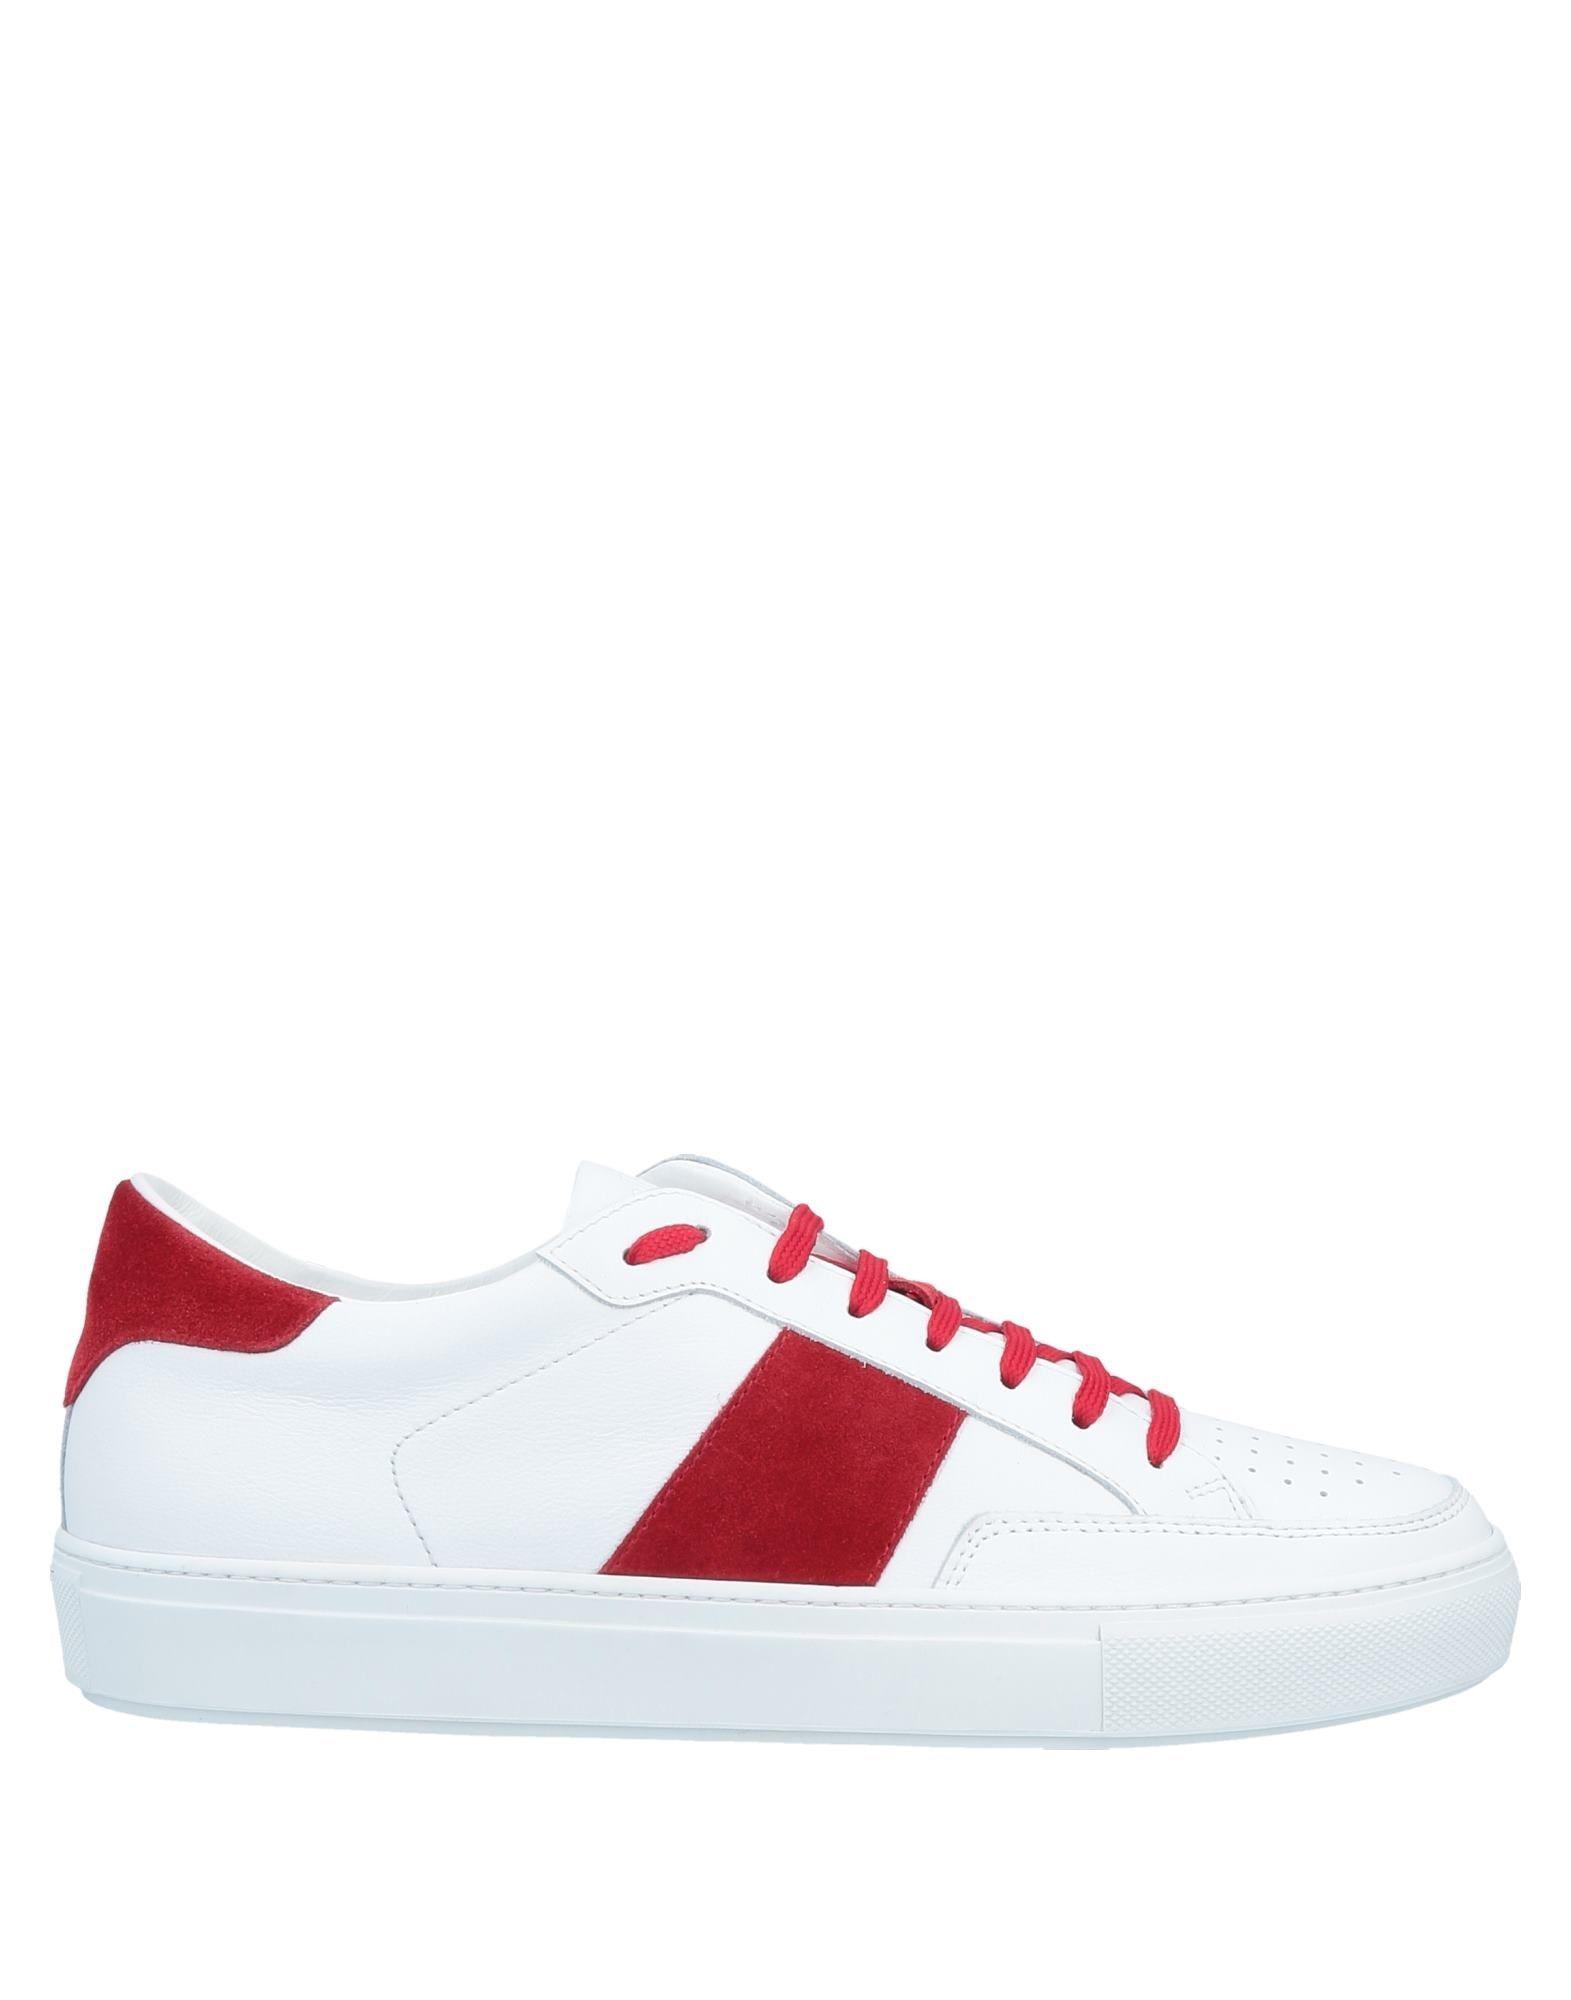 Eleventy Suede Low-tops & Sneakers in White for Men - Lyst